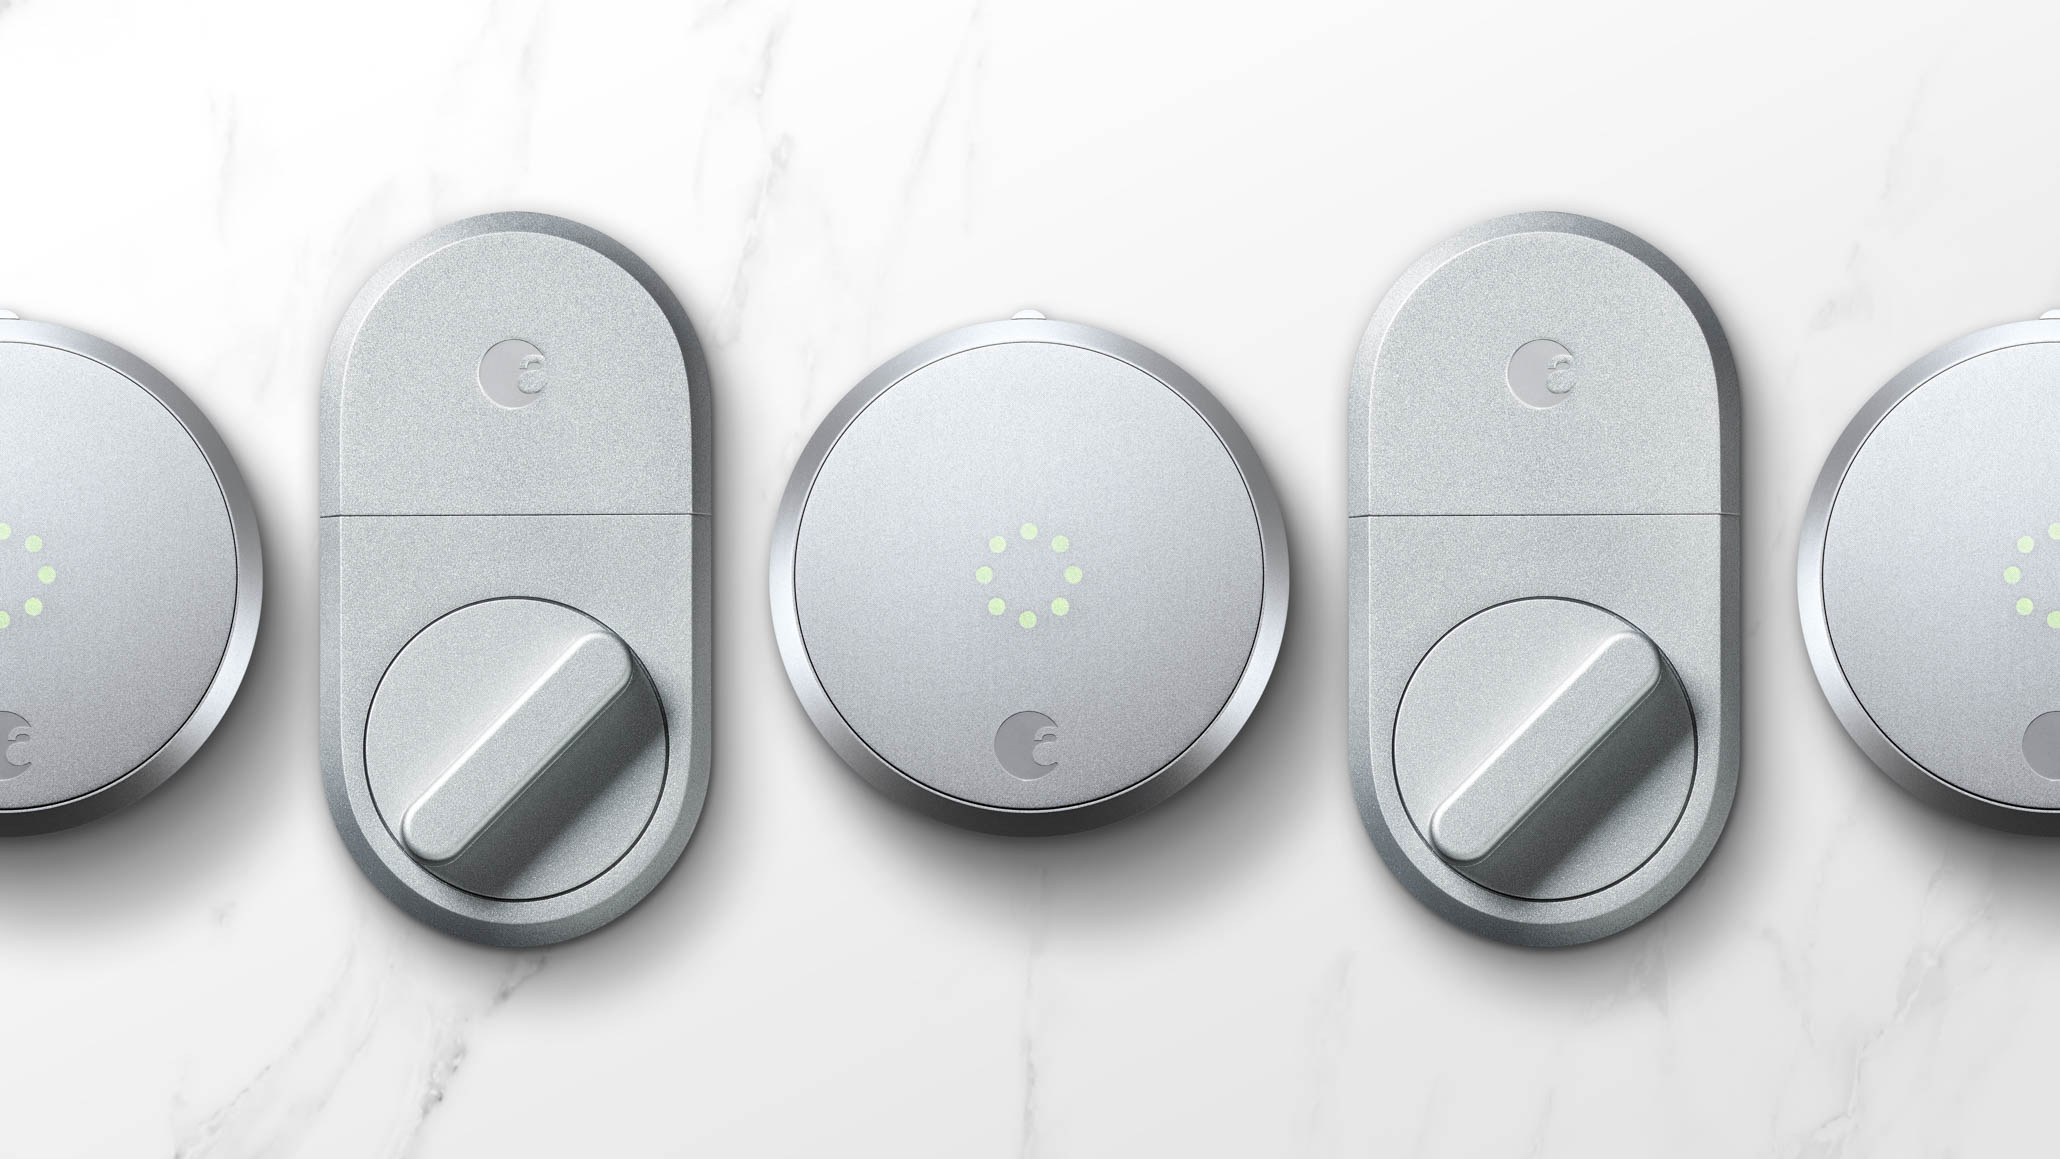 All August smart locks will benefit from the new SmartThings integrations, including the Smart Lock and Smart Lock Pro. Image: August Home.